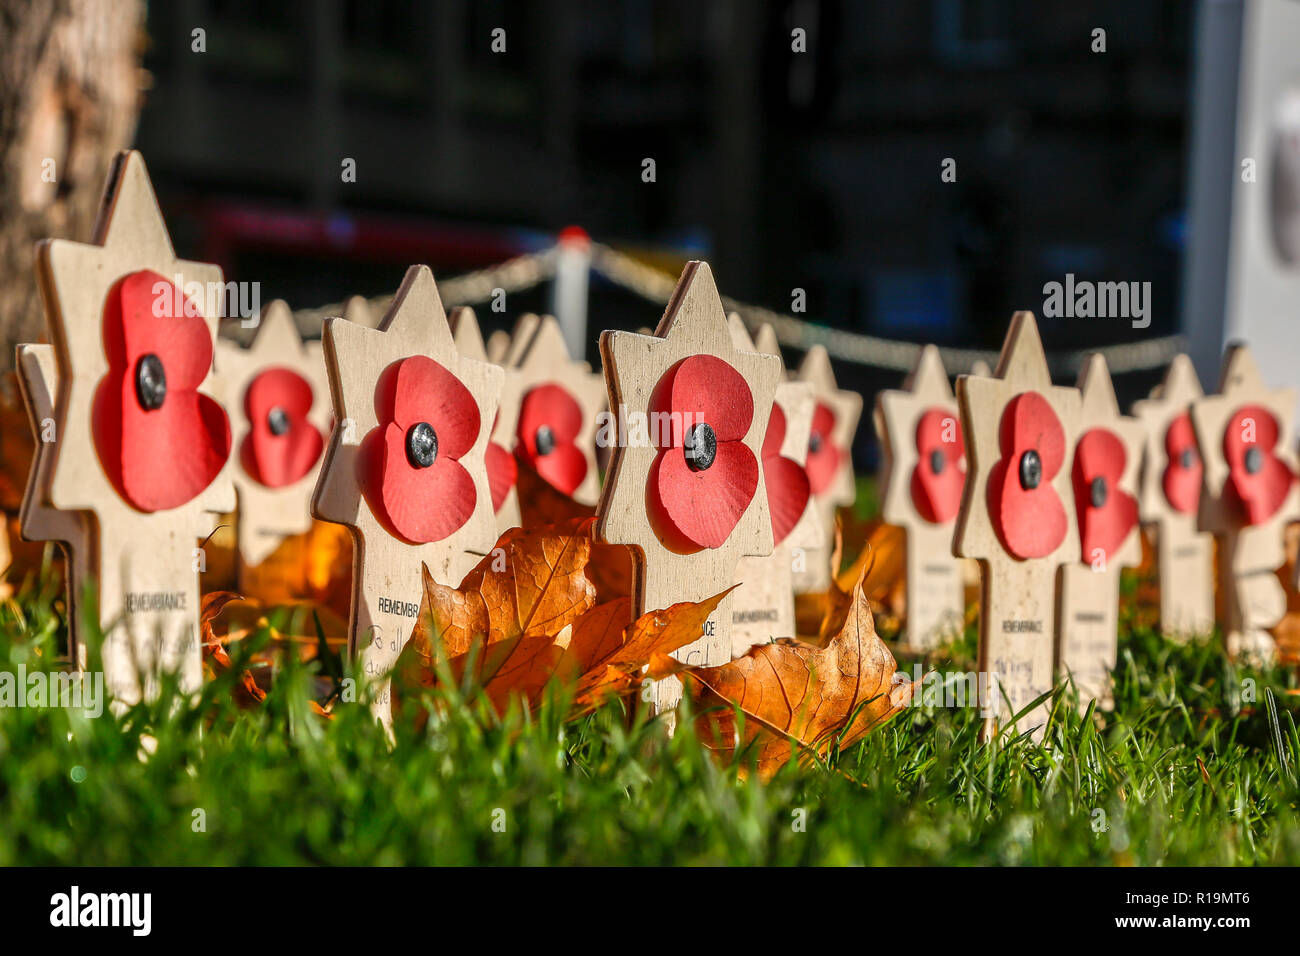 Glasgow, UK. 10th Nov, 2018. As the Nation approaches Remembrance Sunday, members of the public continue to visit the British Legion Garden of Remembrance to pay their respects and to leave poppies and crosses with their personal messages to those who were killed in all wars. The garden allows for all regiments, religions and nationalities to be recognised and remembered. Credit: Findlay/Alamy Live News Stock Photo